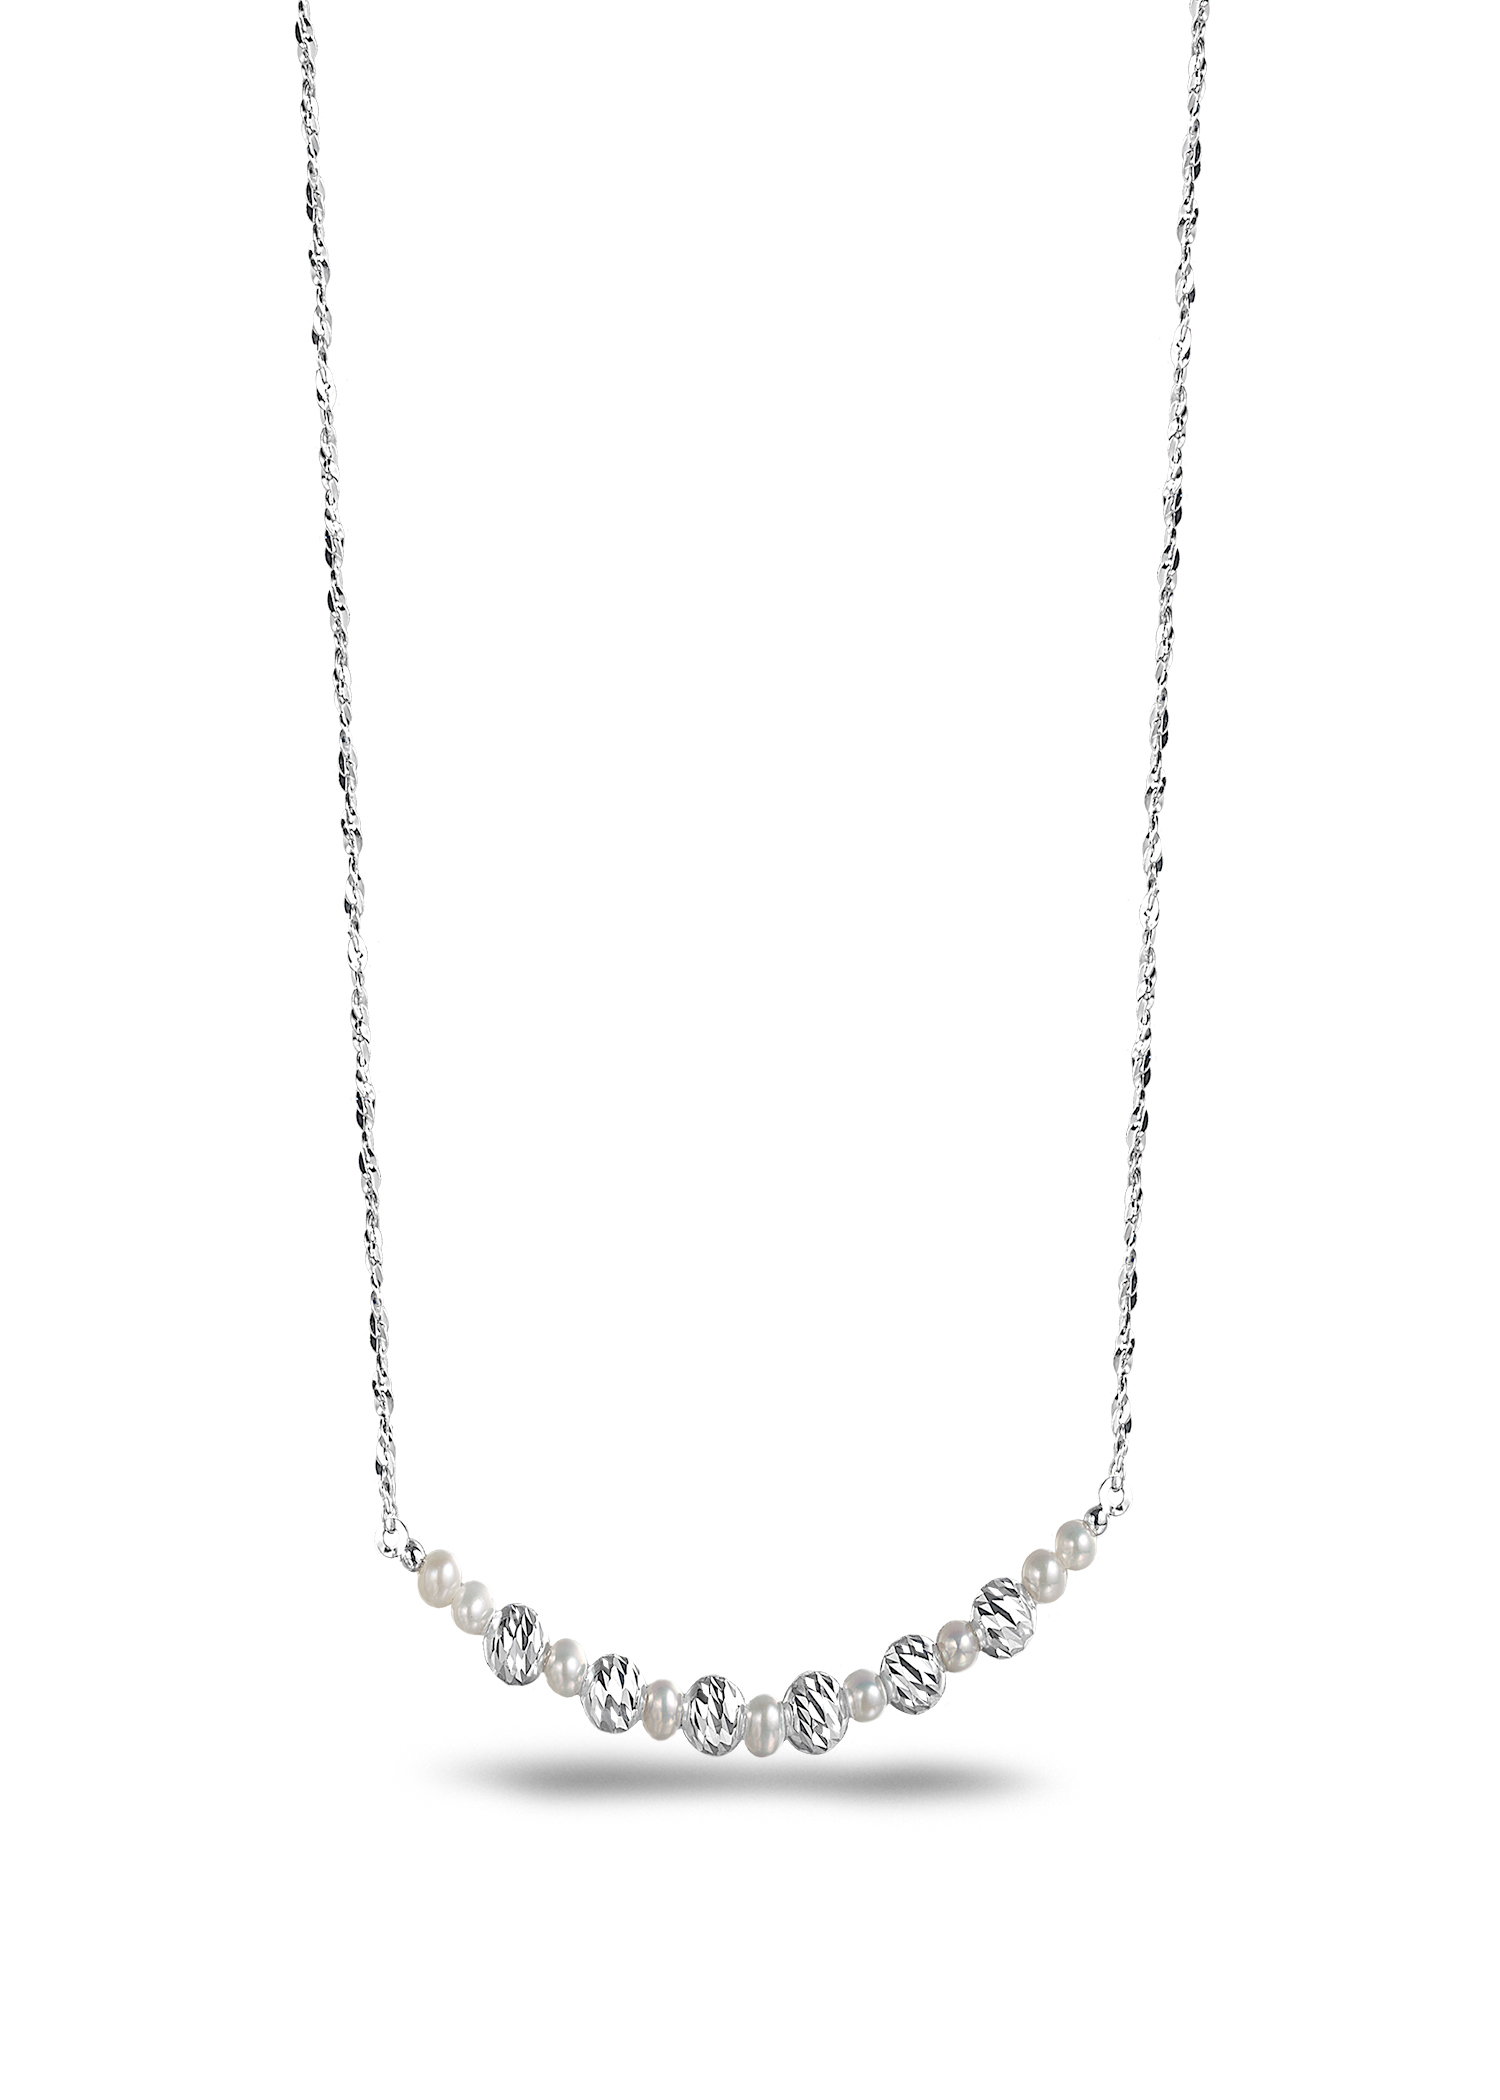 Pearl and Platinum Adjustable Necklace